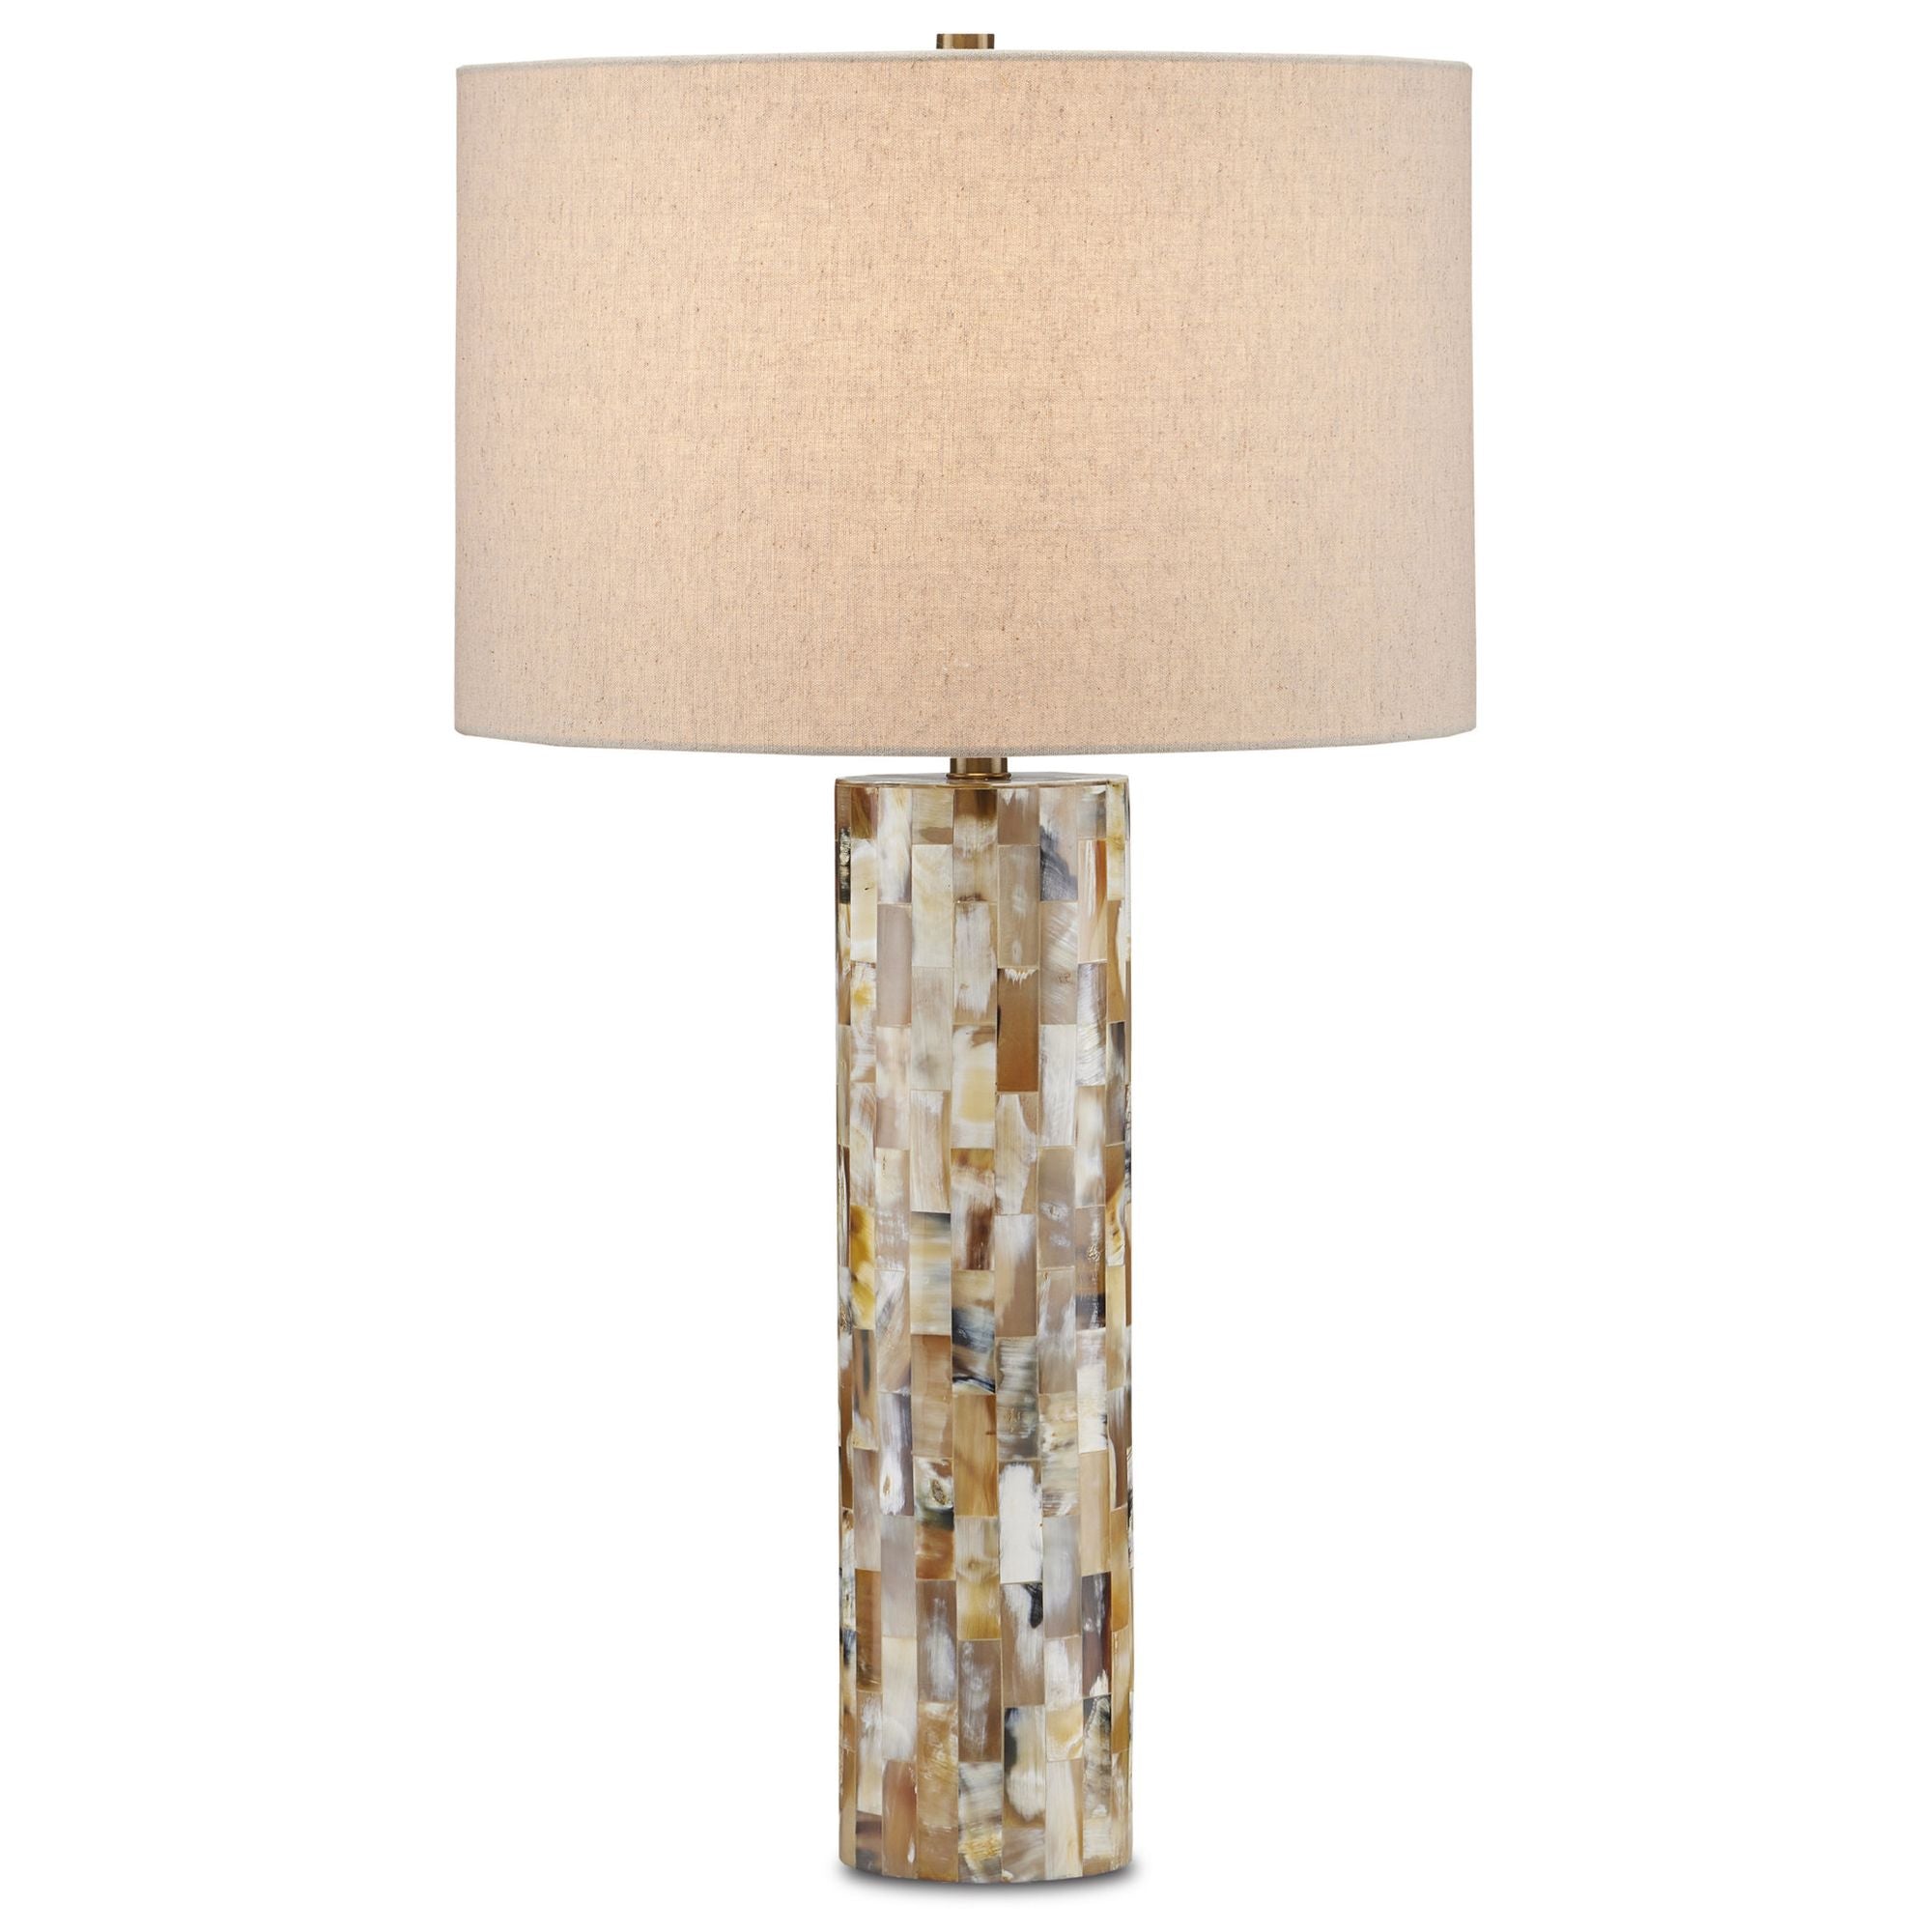 Colevile Table Lamp - Natural